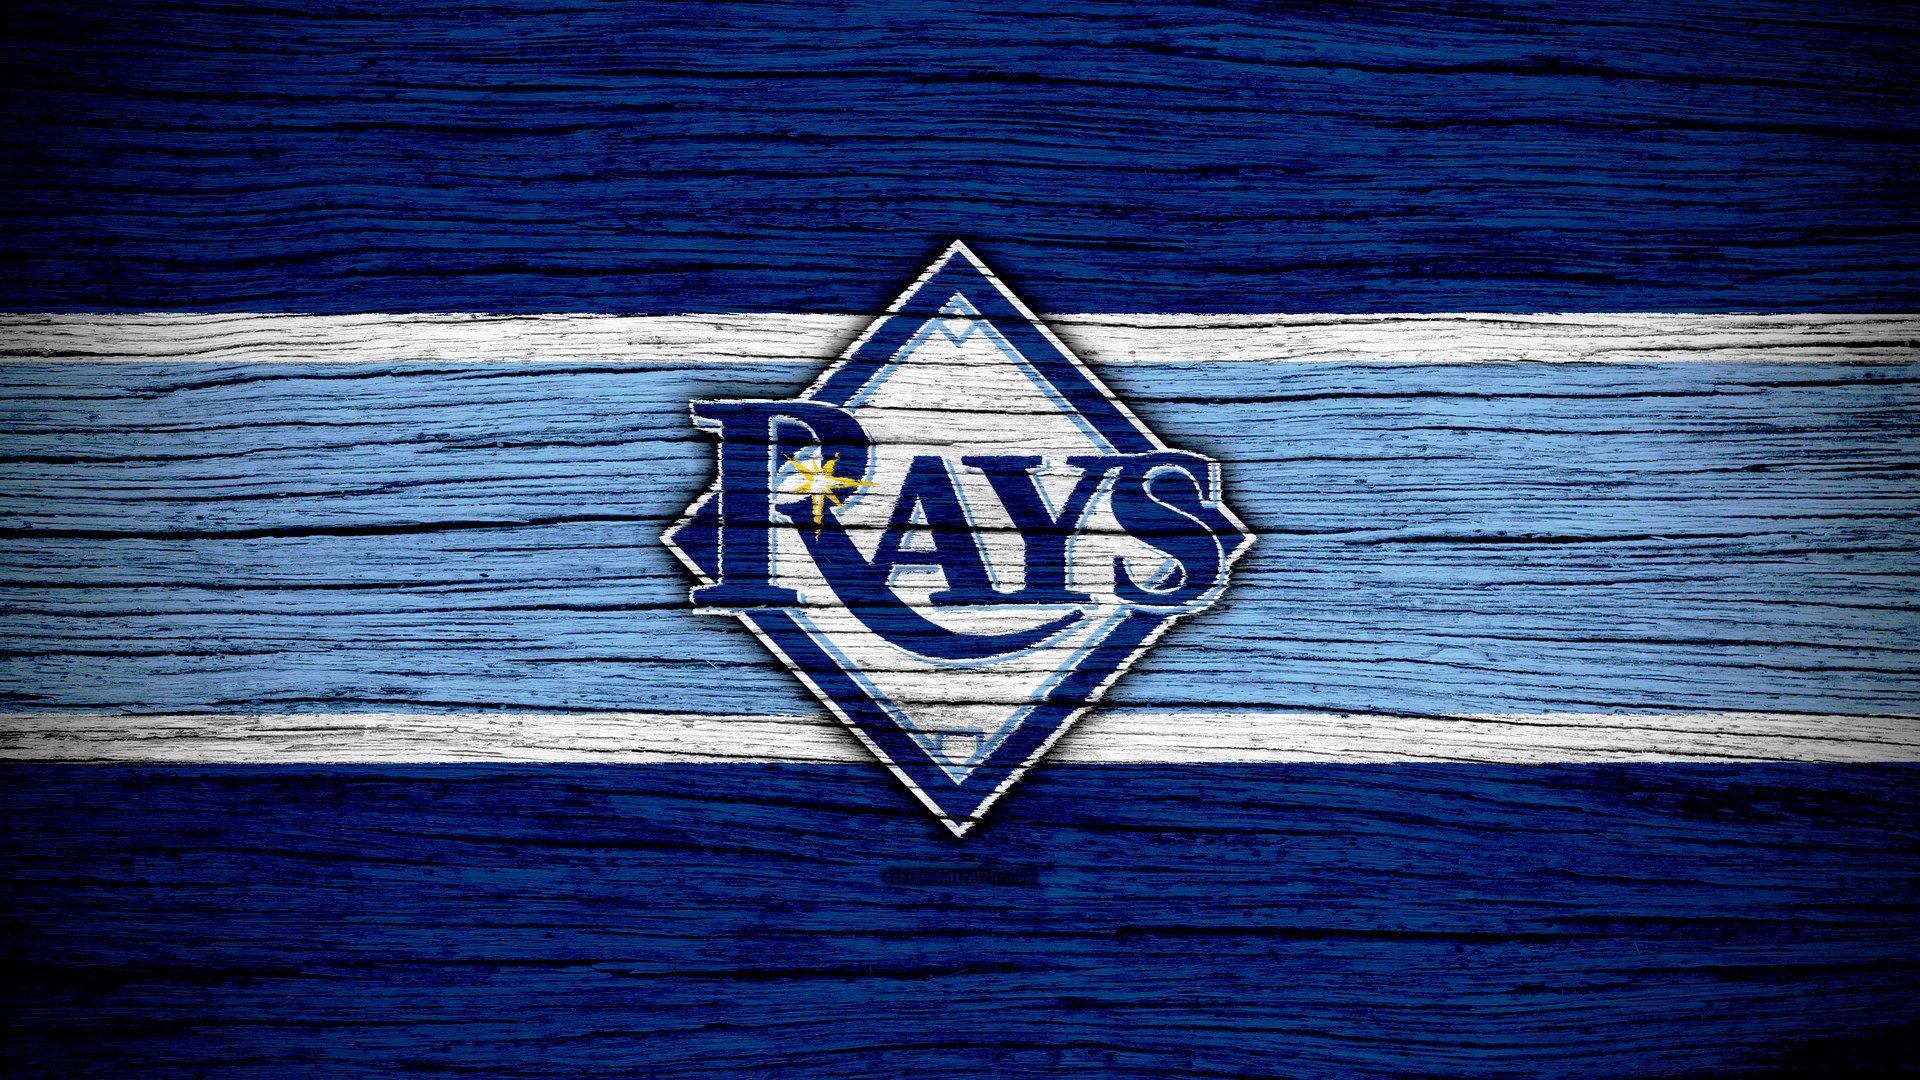 HD Desktop Wallpaper Tampa Bay Rays With high-resolution 1920X1080 pixel. You can use this wallpaper for Mac Desktop Wallpaper, Laptop Screensavers, Android Wallpapers, Tablet or iPhone Home Screen and another mobile phone device